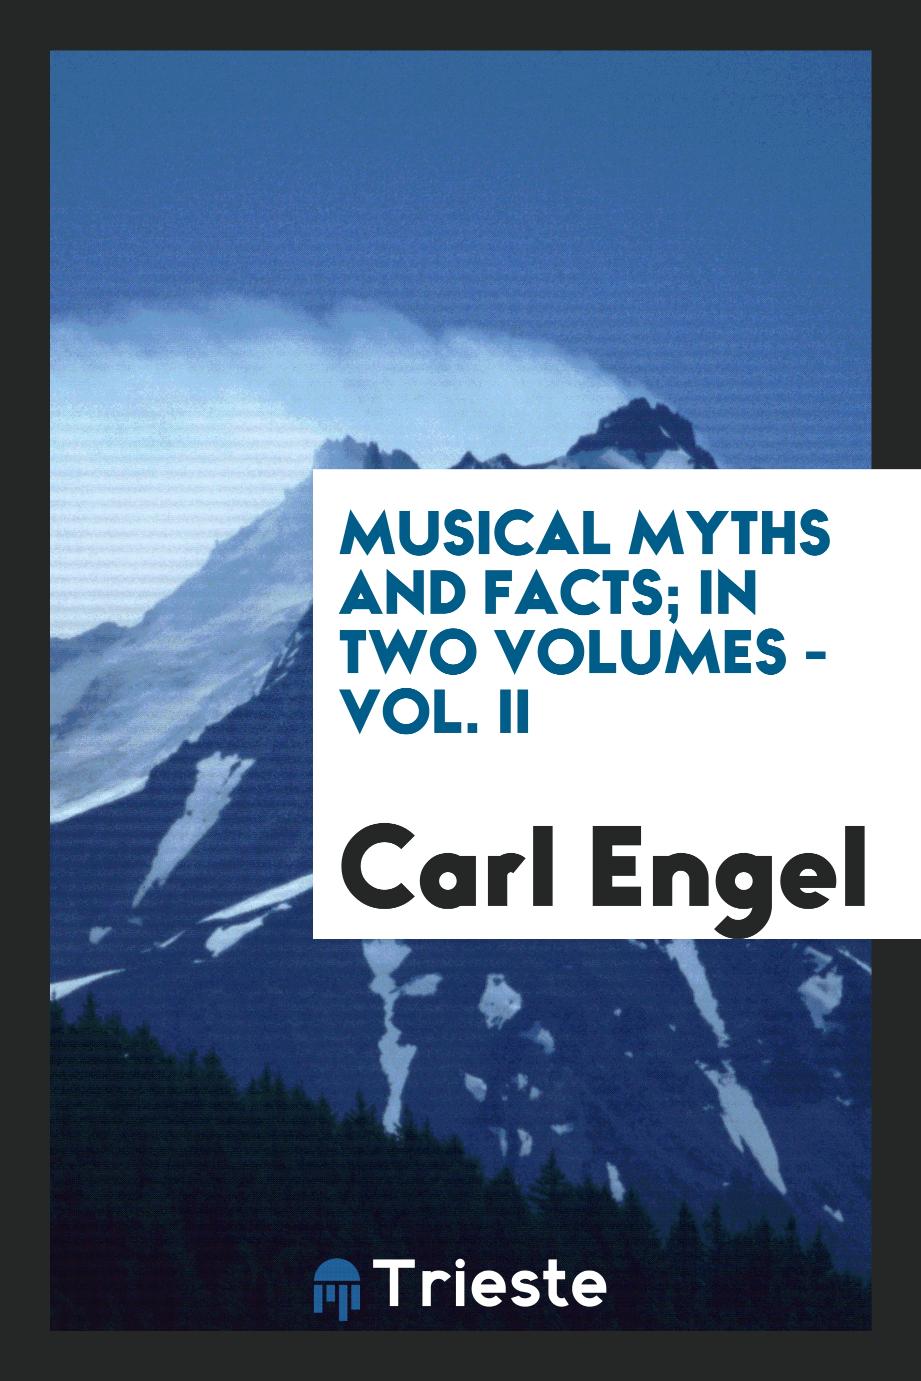 Musical myths and facts; In two volumes - Vol. II